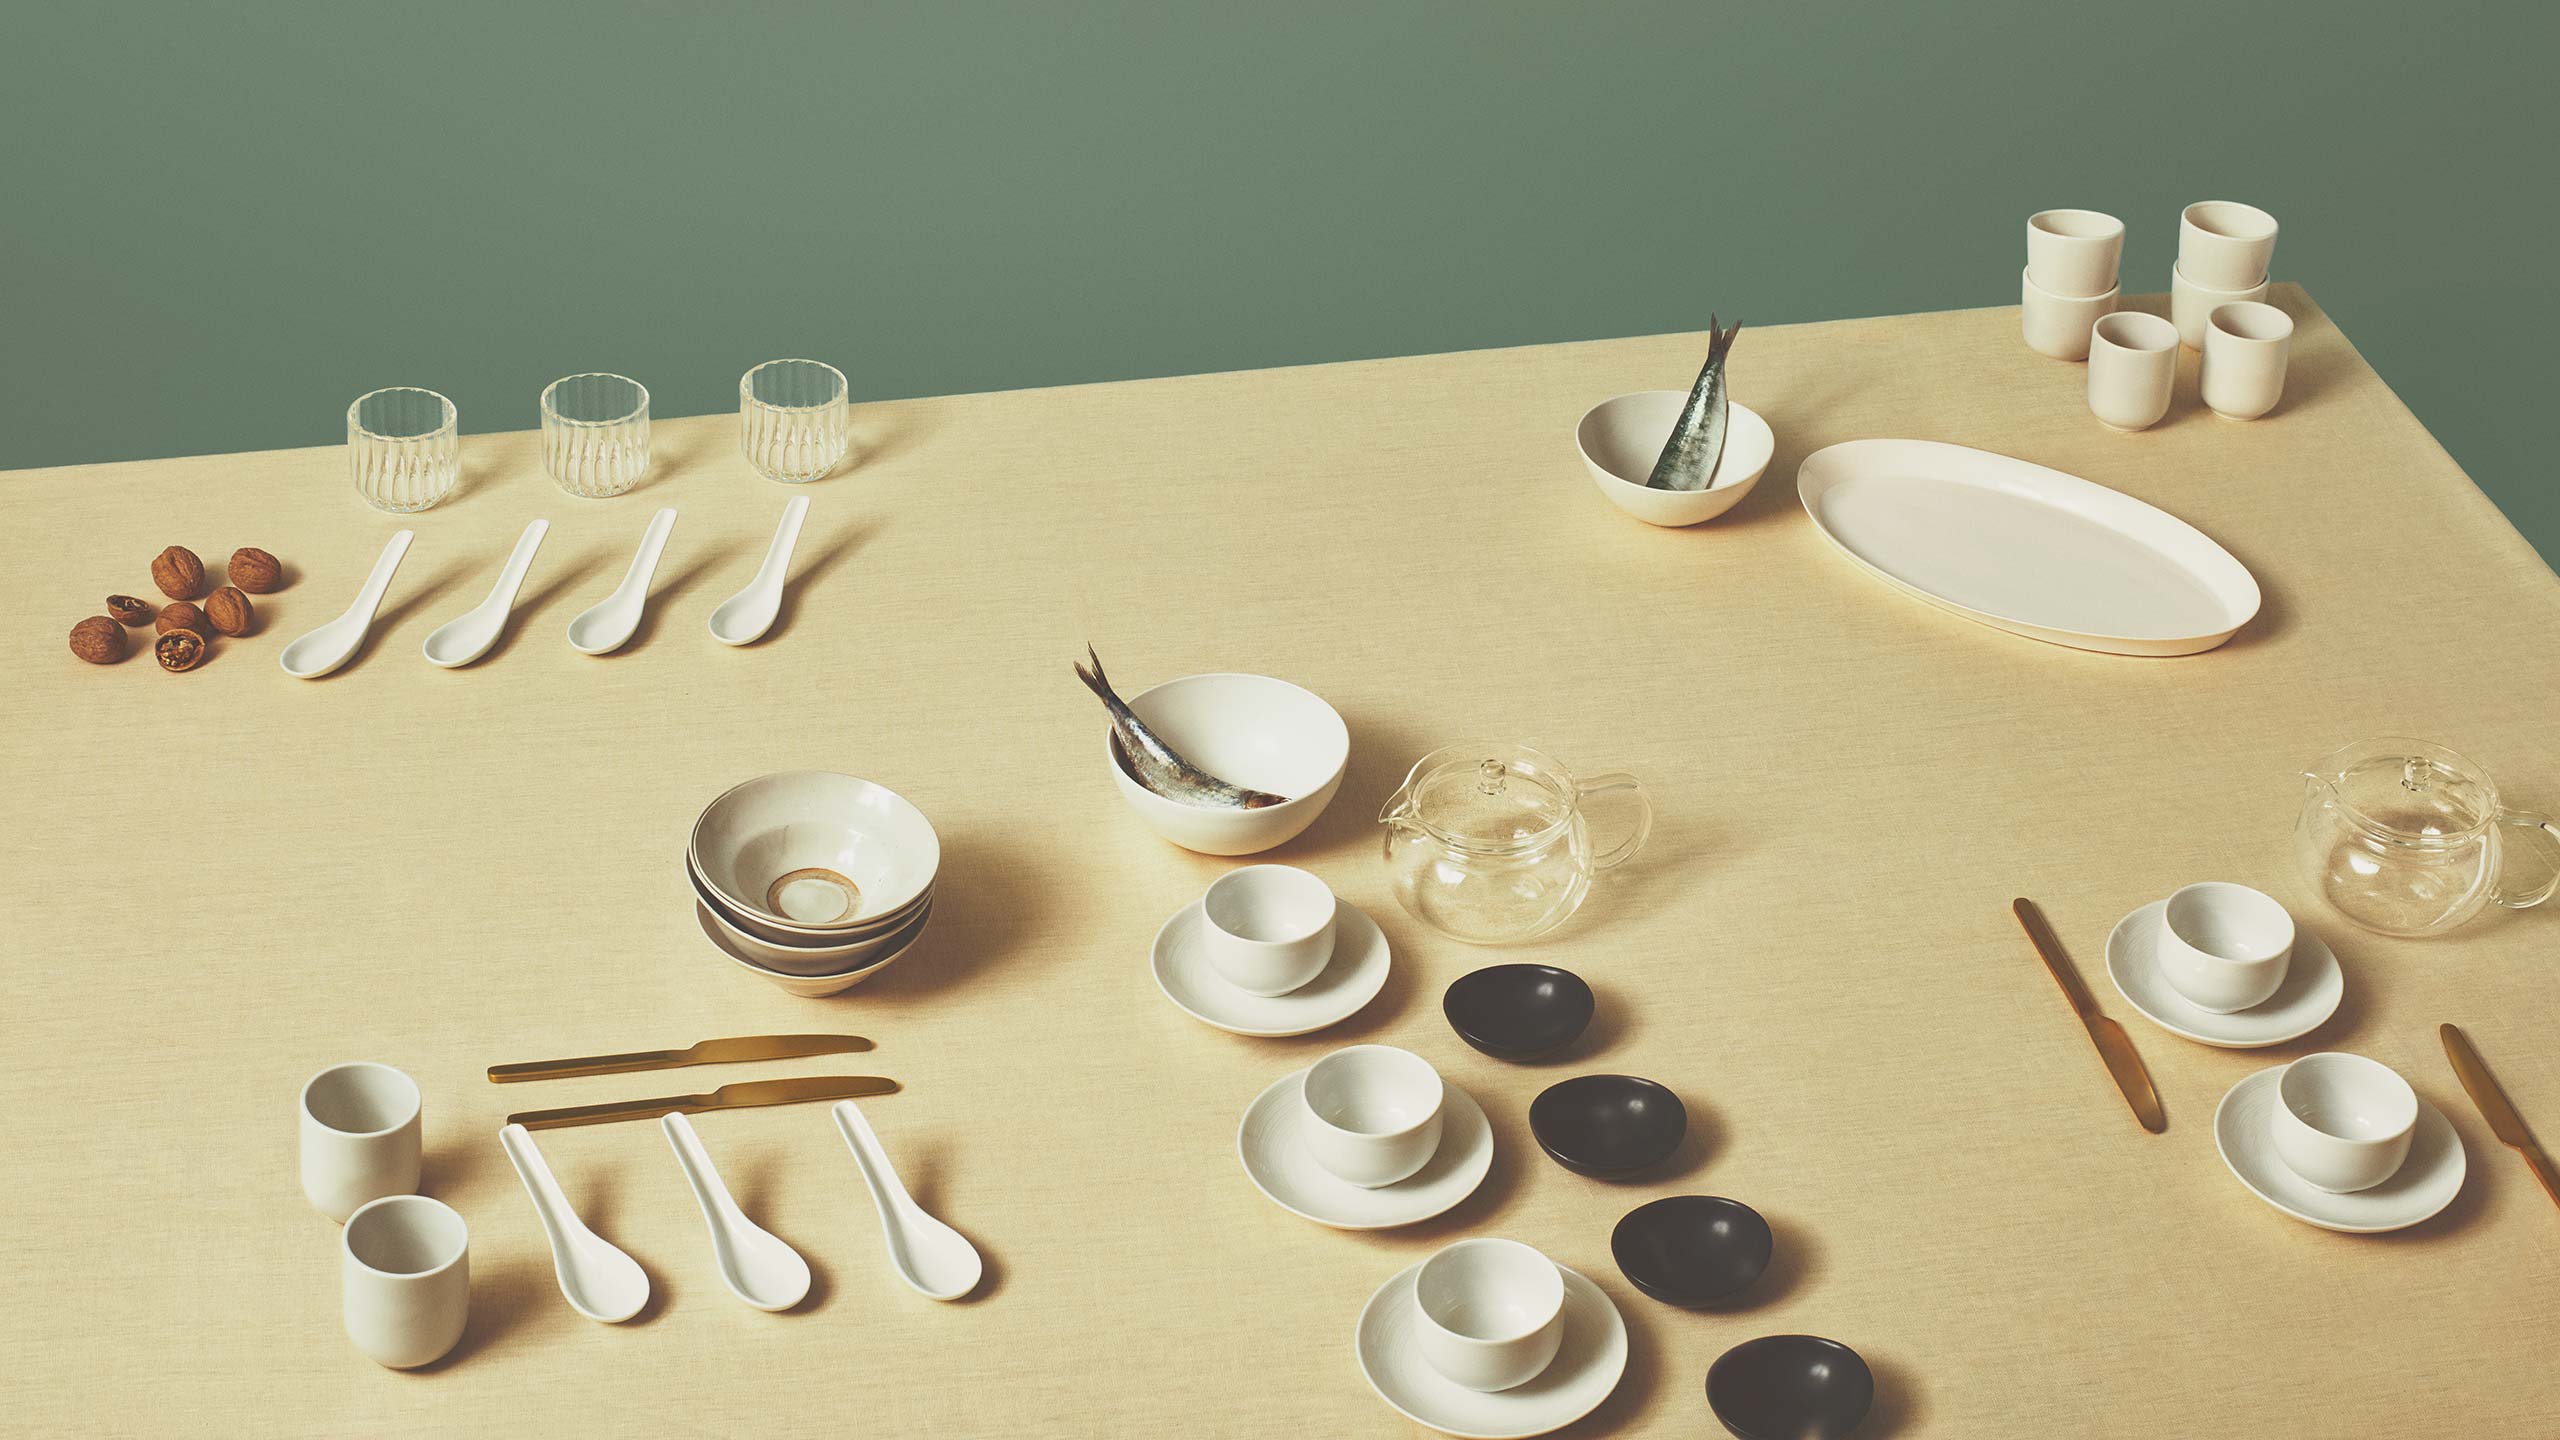 A table set for a meal, with cups, teapots, soup bowls and cutlery on an oatmeal-coloured tablecloth.